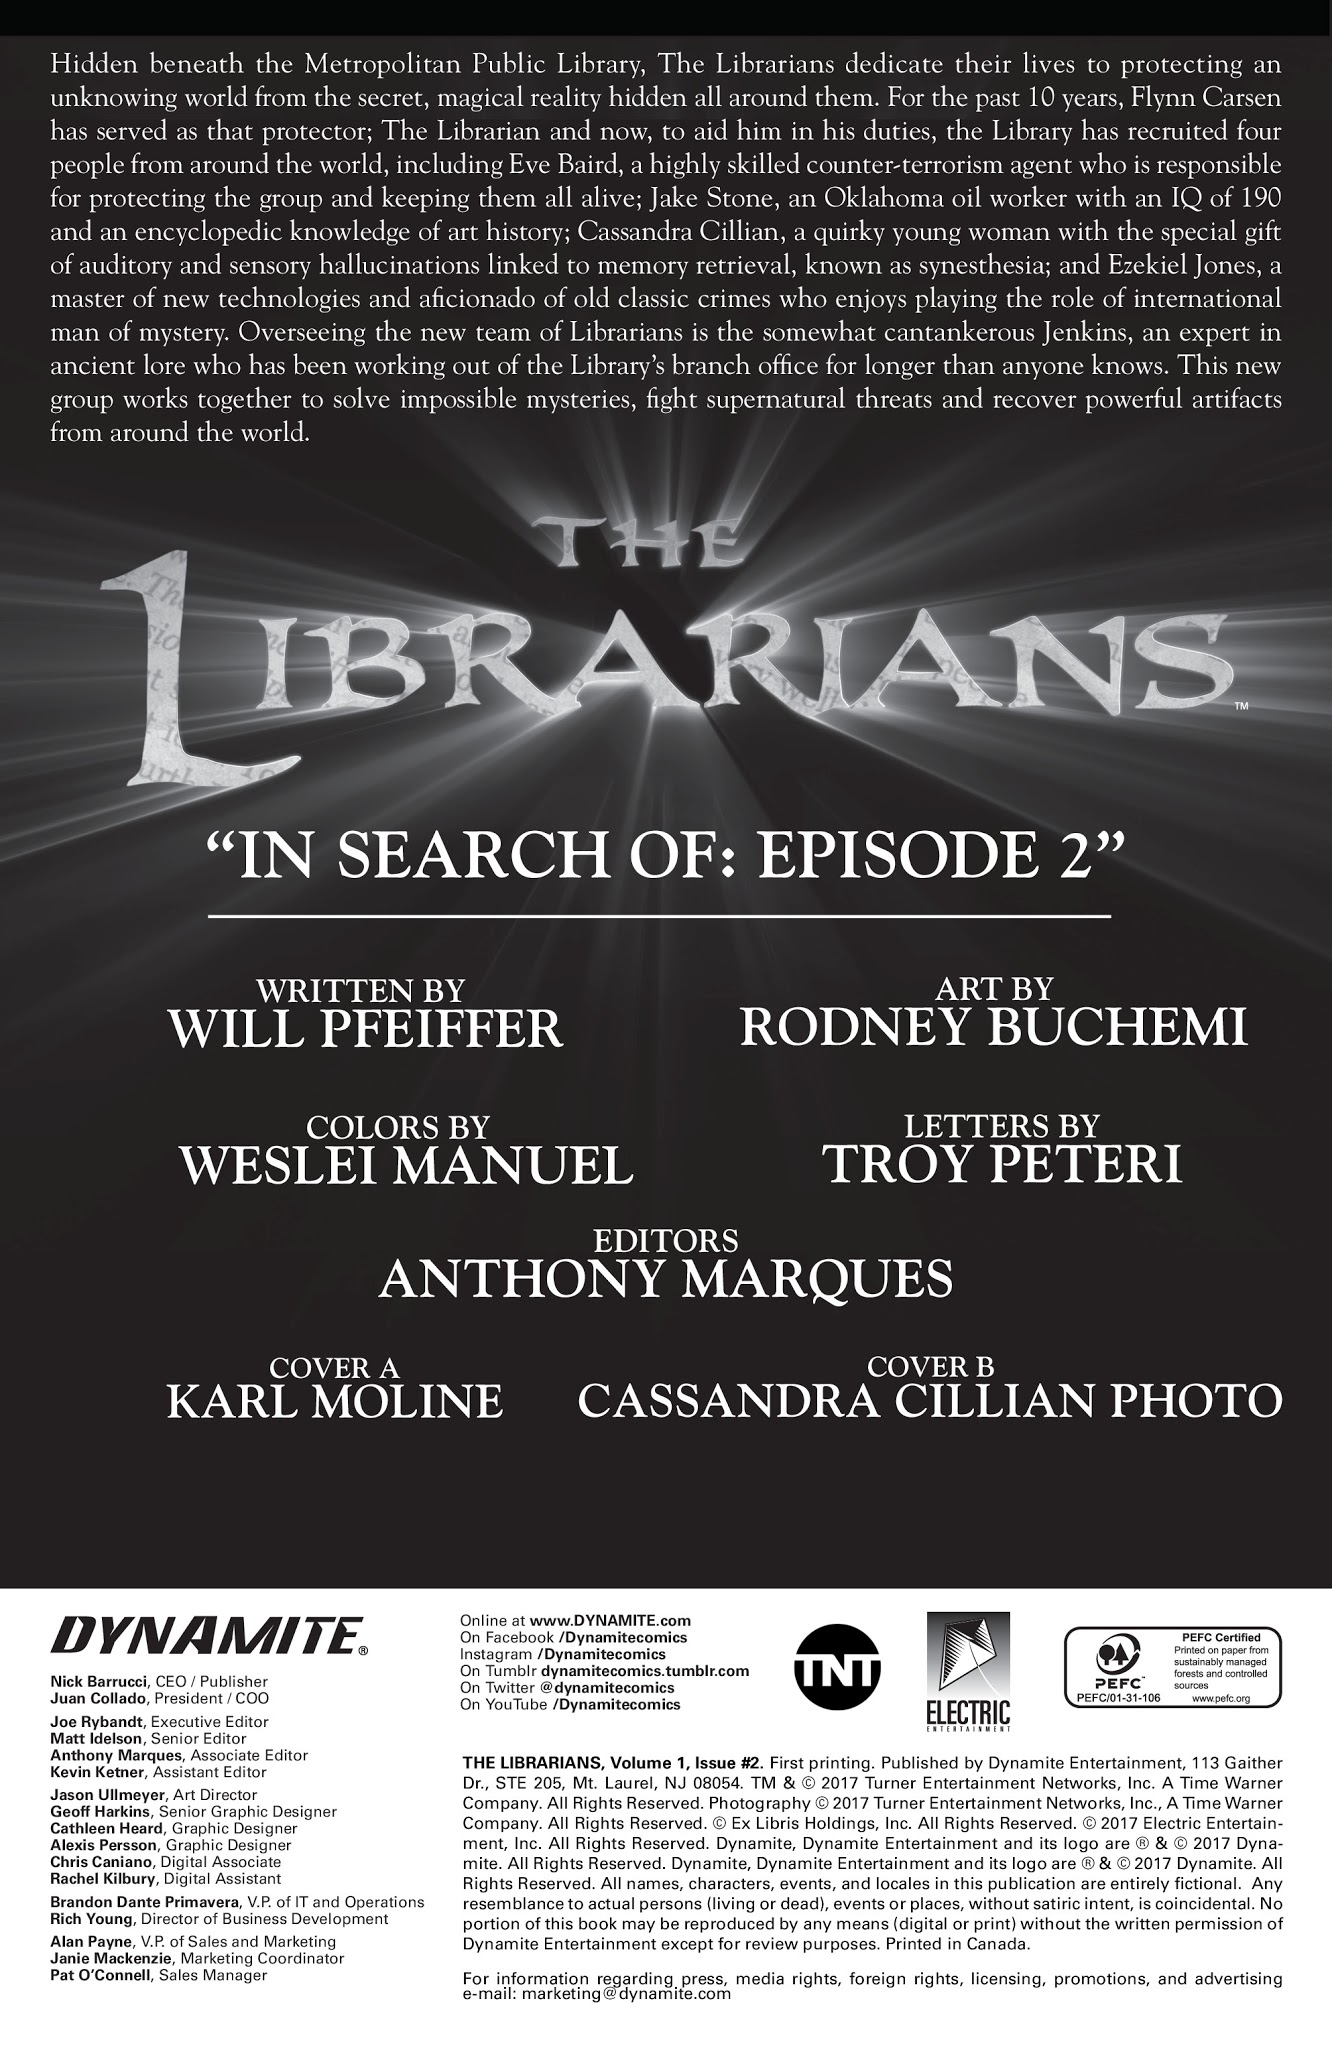 Read online The Librarians comic -  Issue #2 - 3